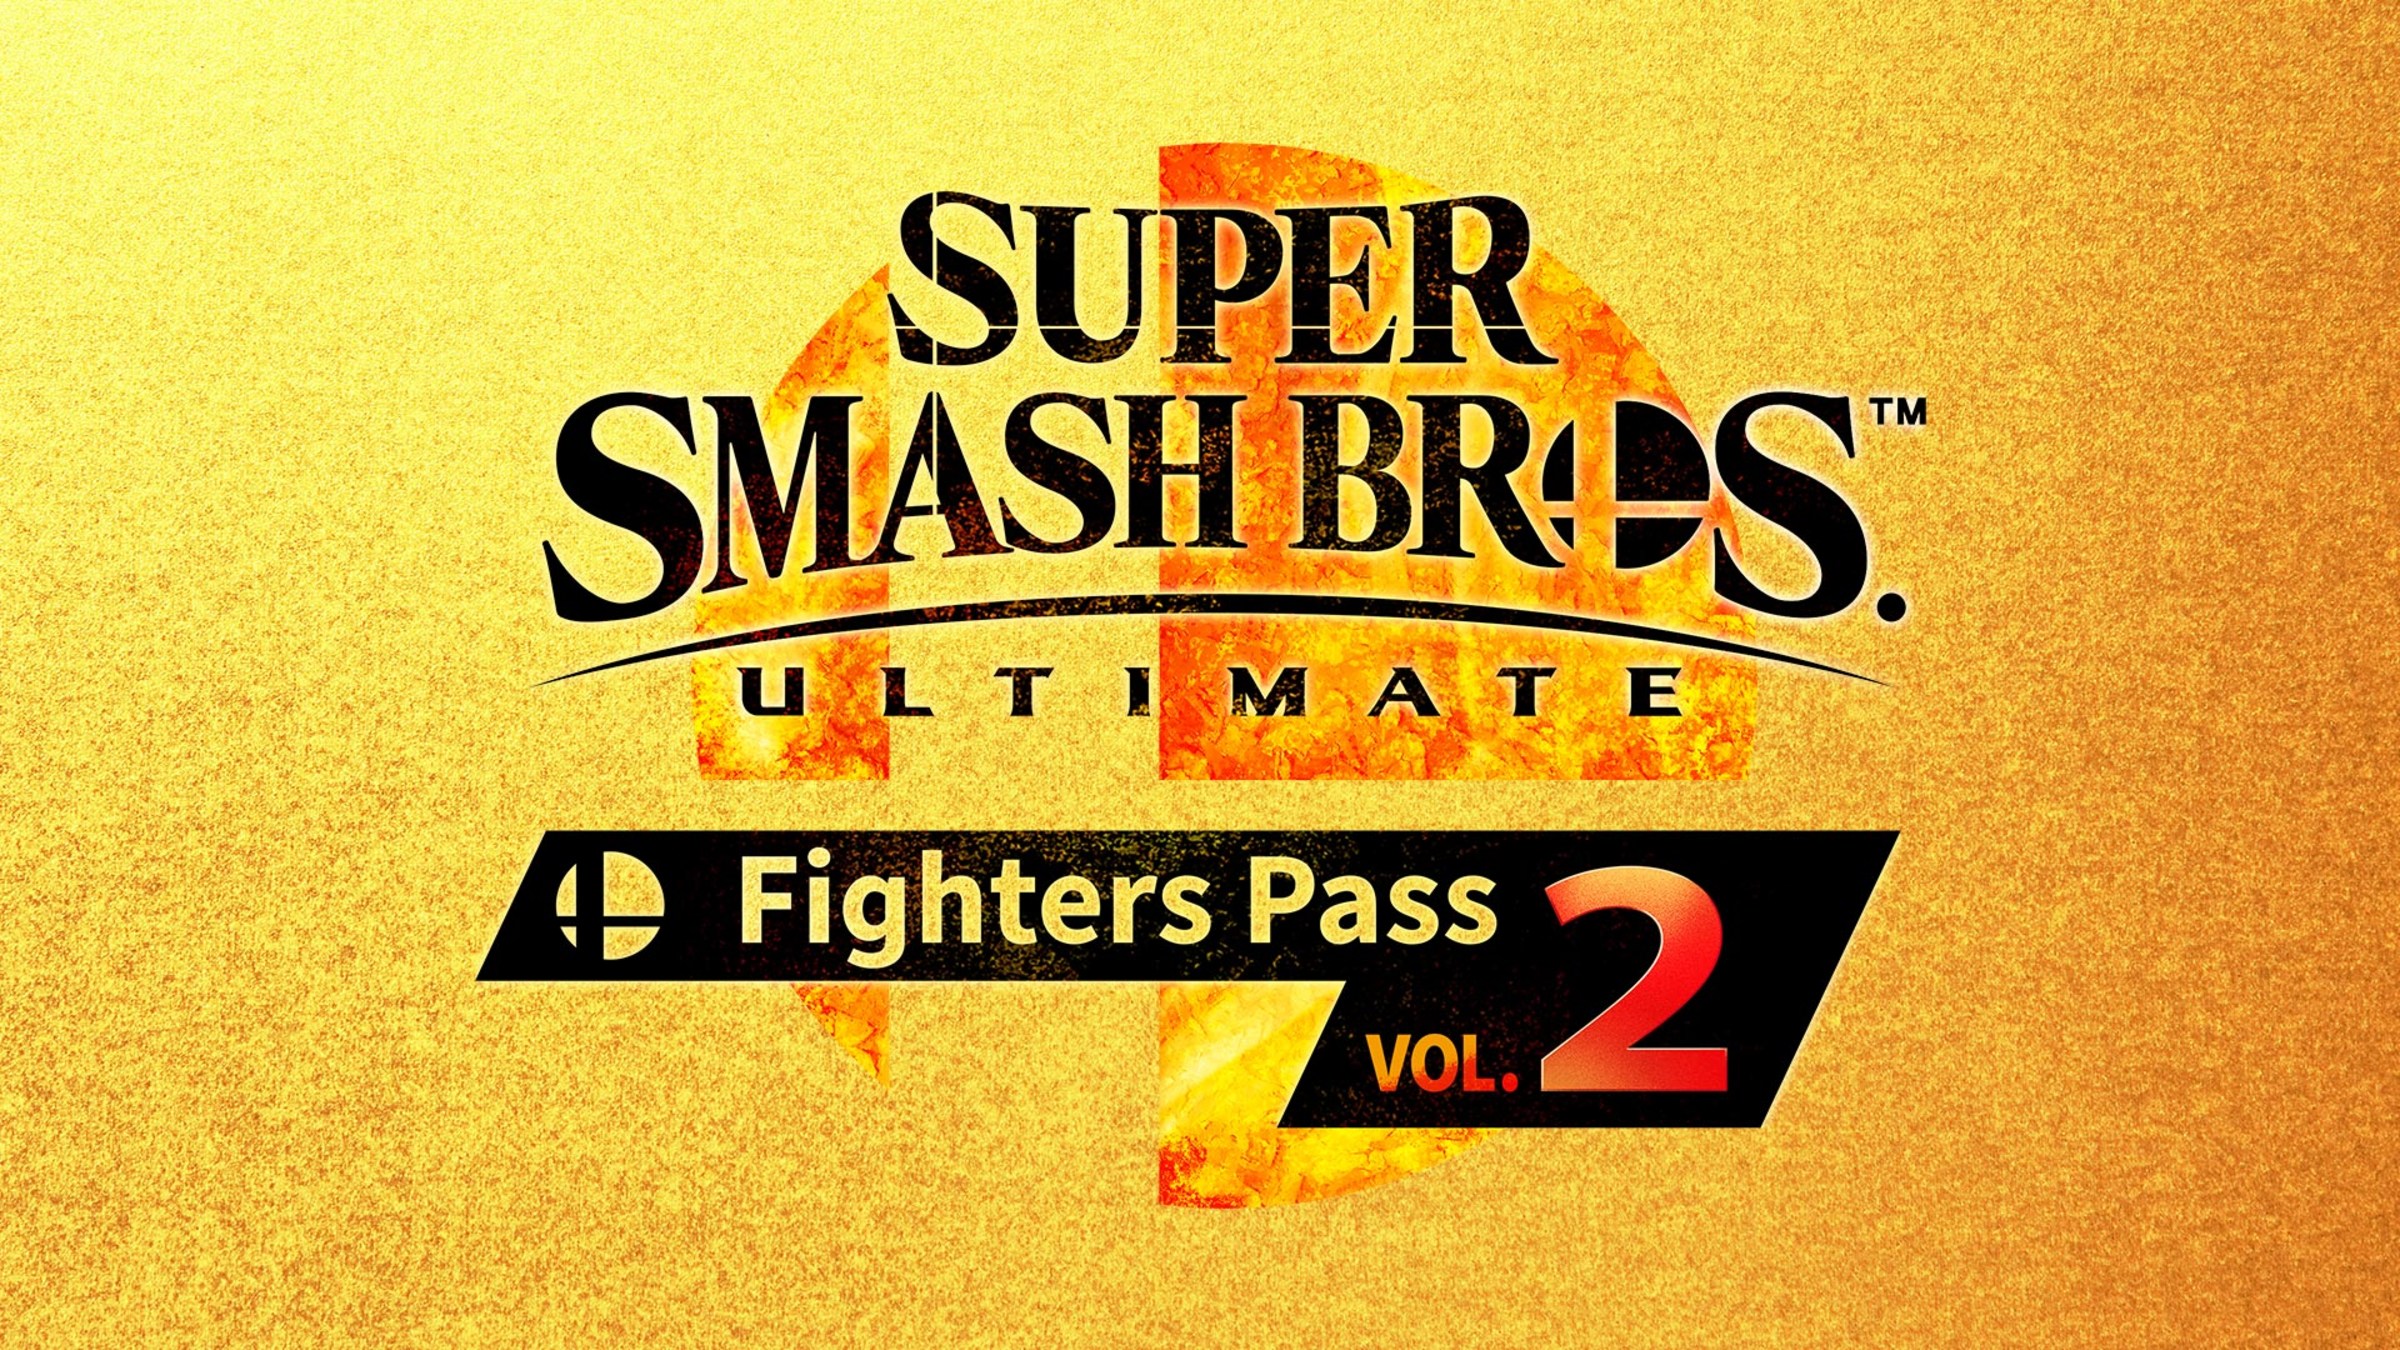 Site Bros.™ Super Pass 2 Nintendo Smash Nintendo - Switch for Fighters Official Vol. Ultimate: